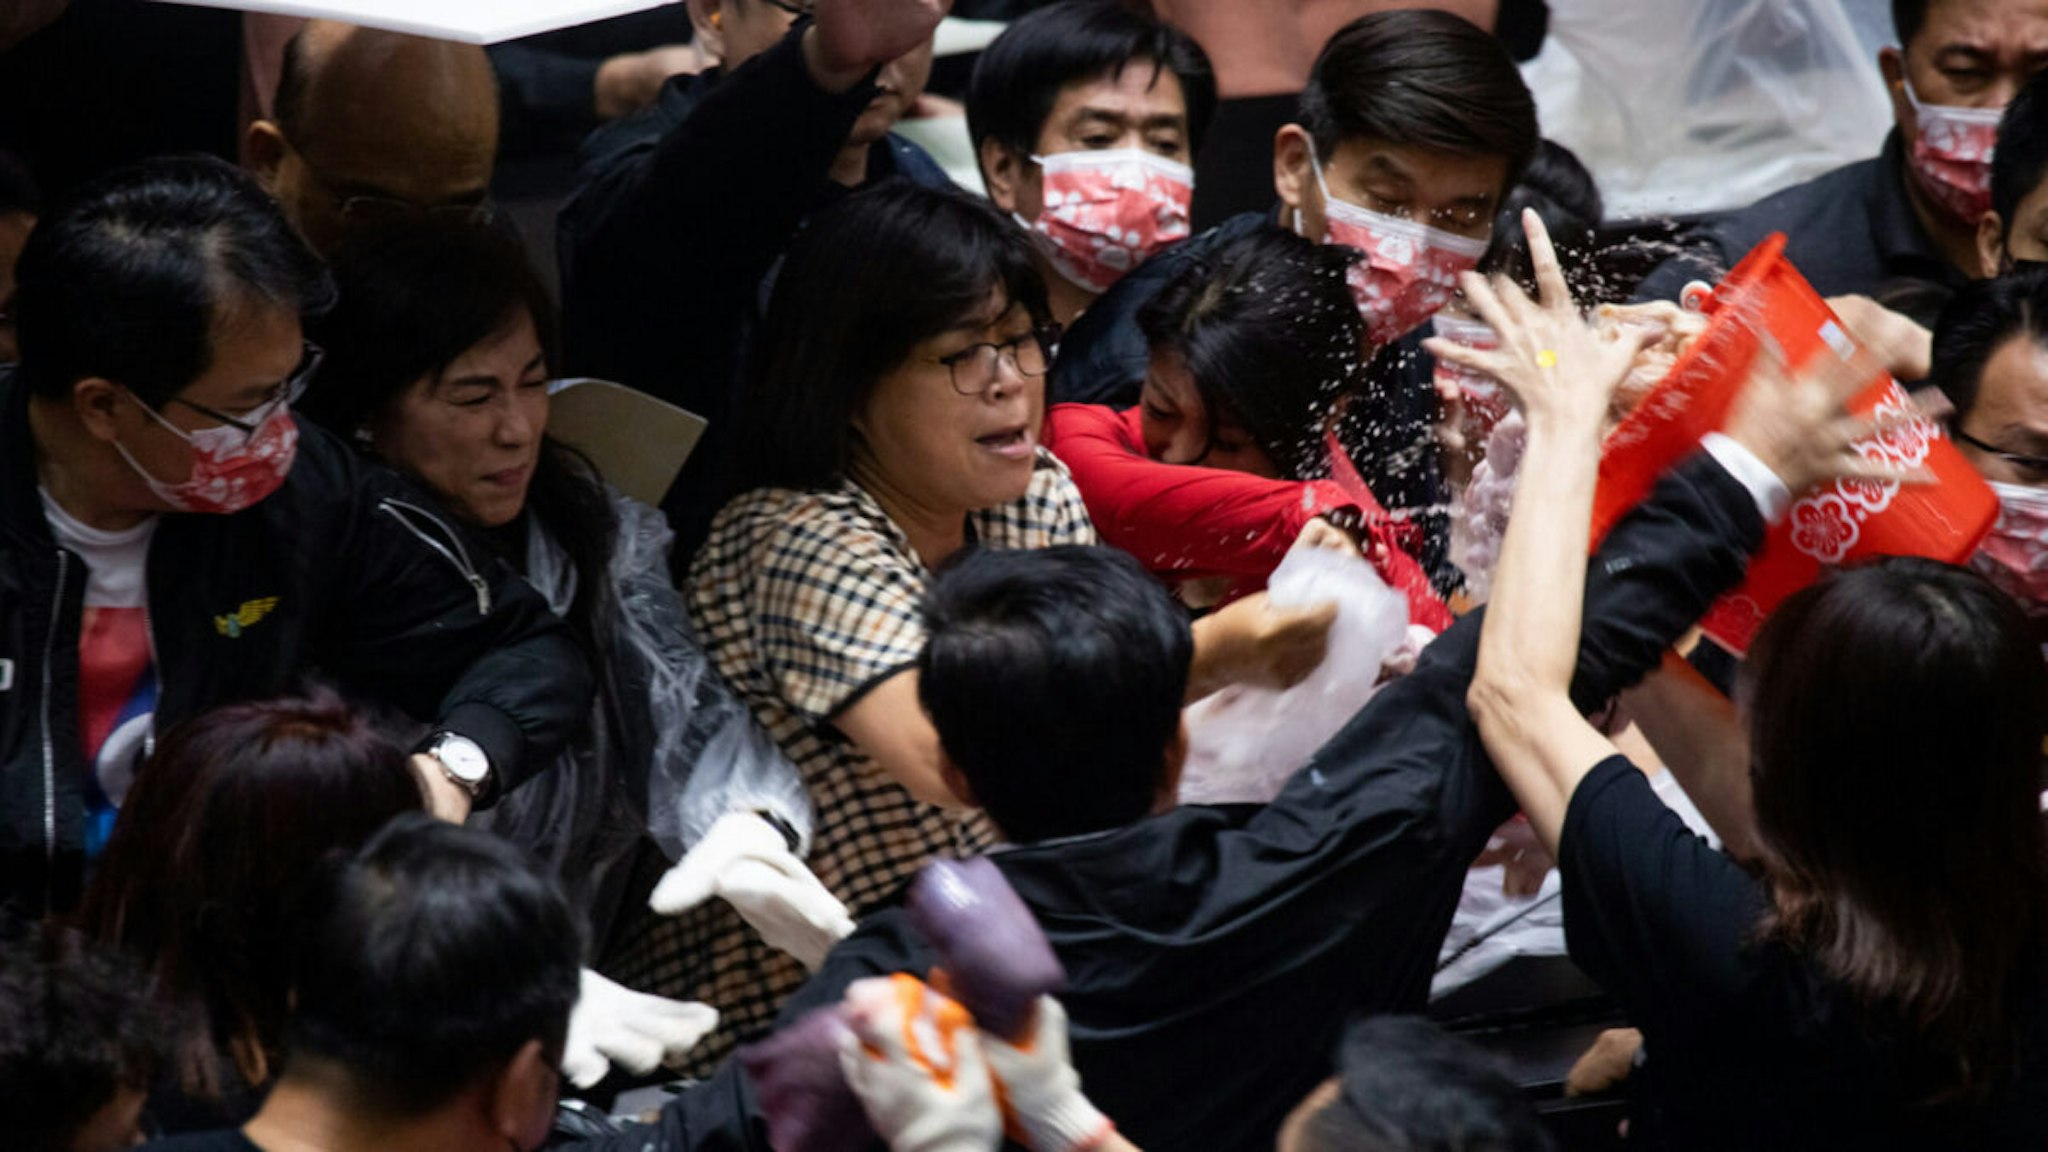 Kuomintang (KMT) legislators throw pig offal on the podium in Taiwan parliament in Taipei, Taiwan, on 27 November 2020.